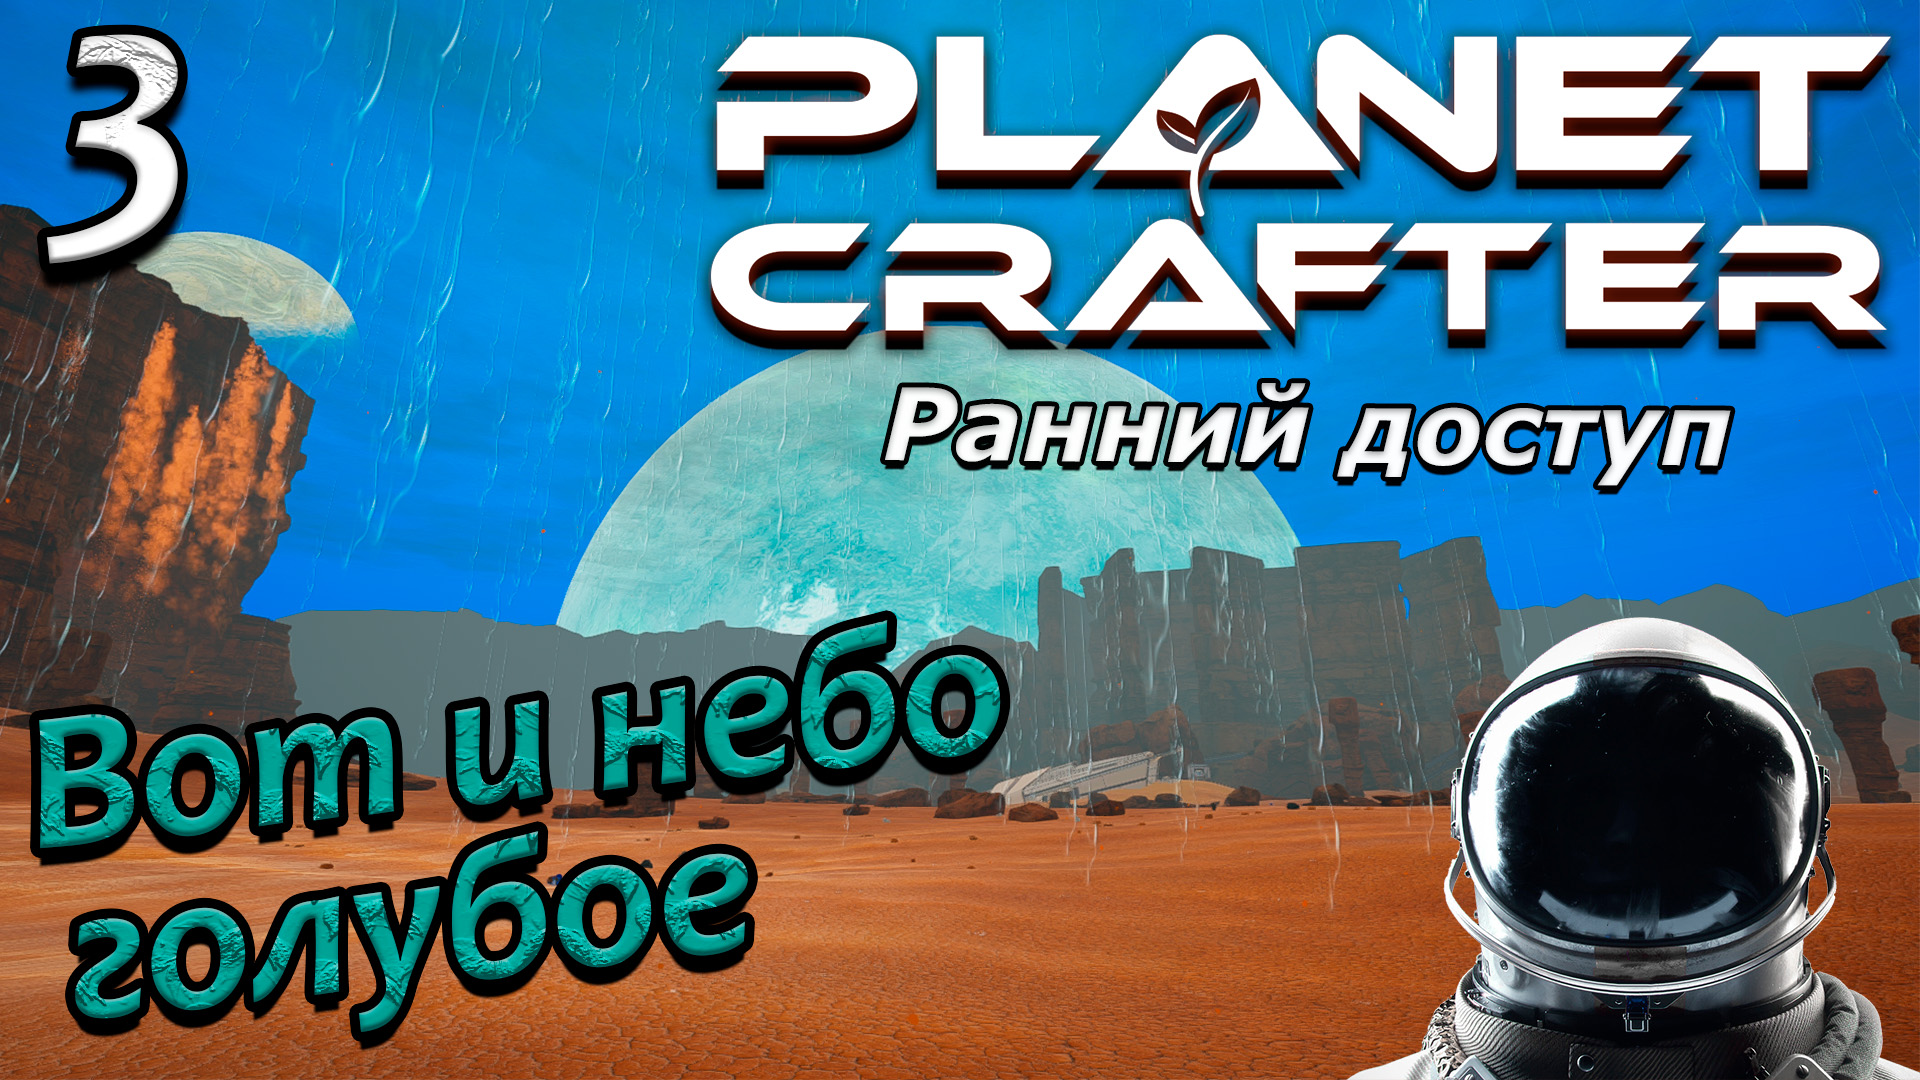 The planet crafter читы. Игра the Planet Crafter. Planet Crafter последняя версия. The Planet Crafter системные требования.